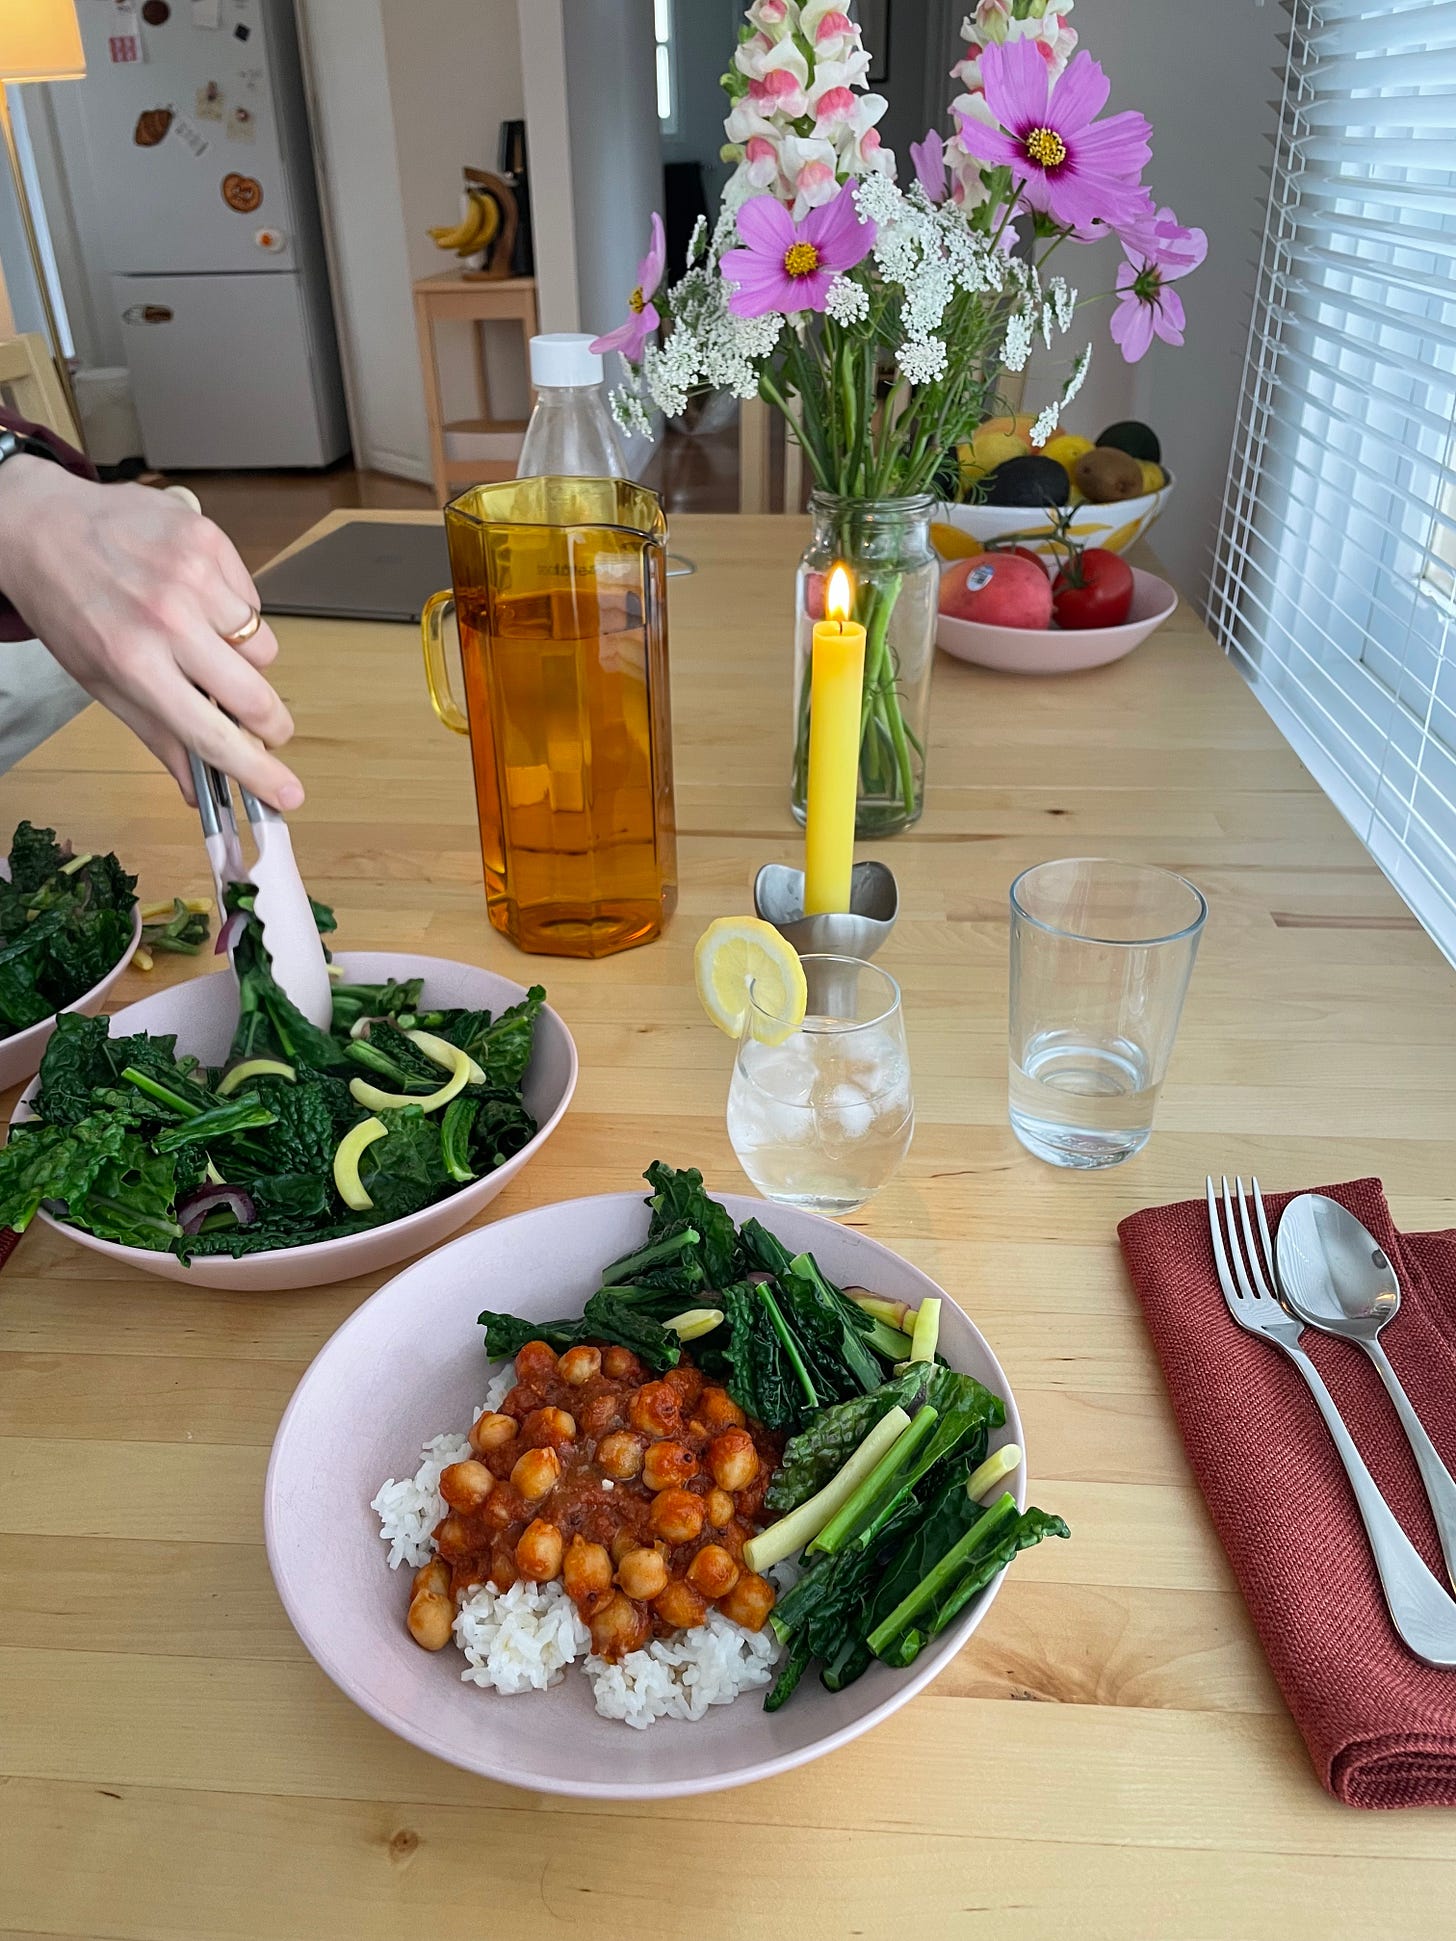 A dining table with flowers and fruit. Two bowls of rice with spiced tomato chickpeas and kale and beans.